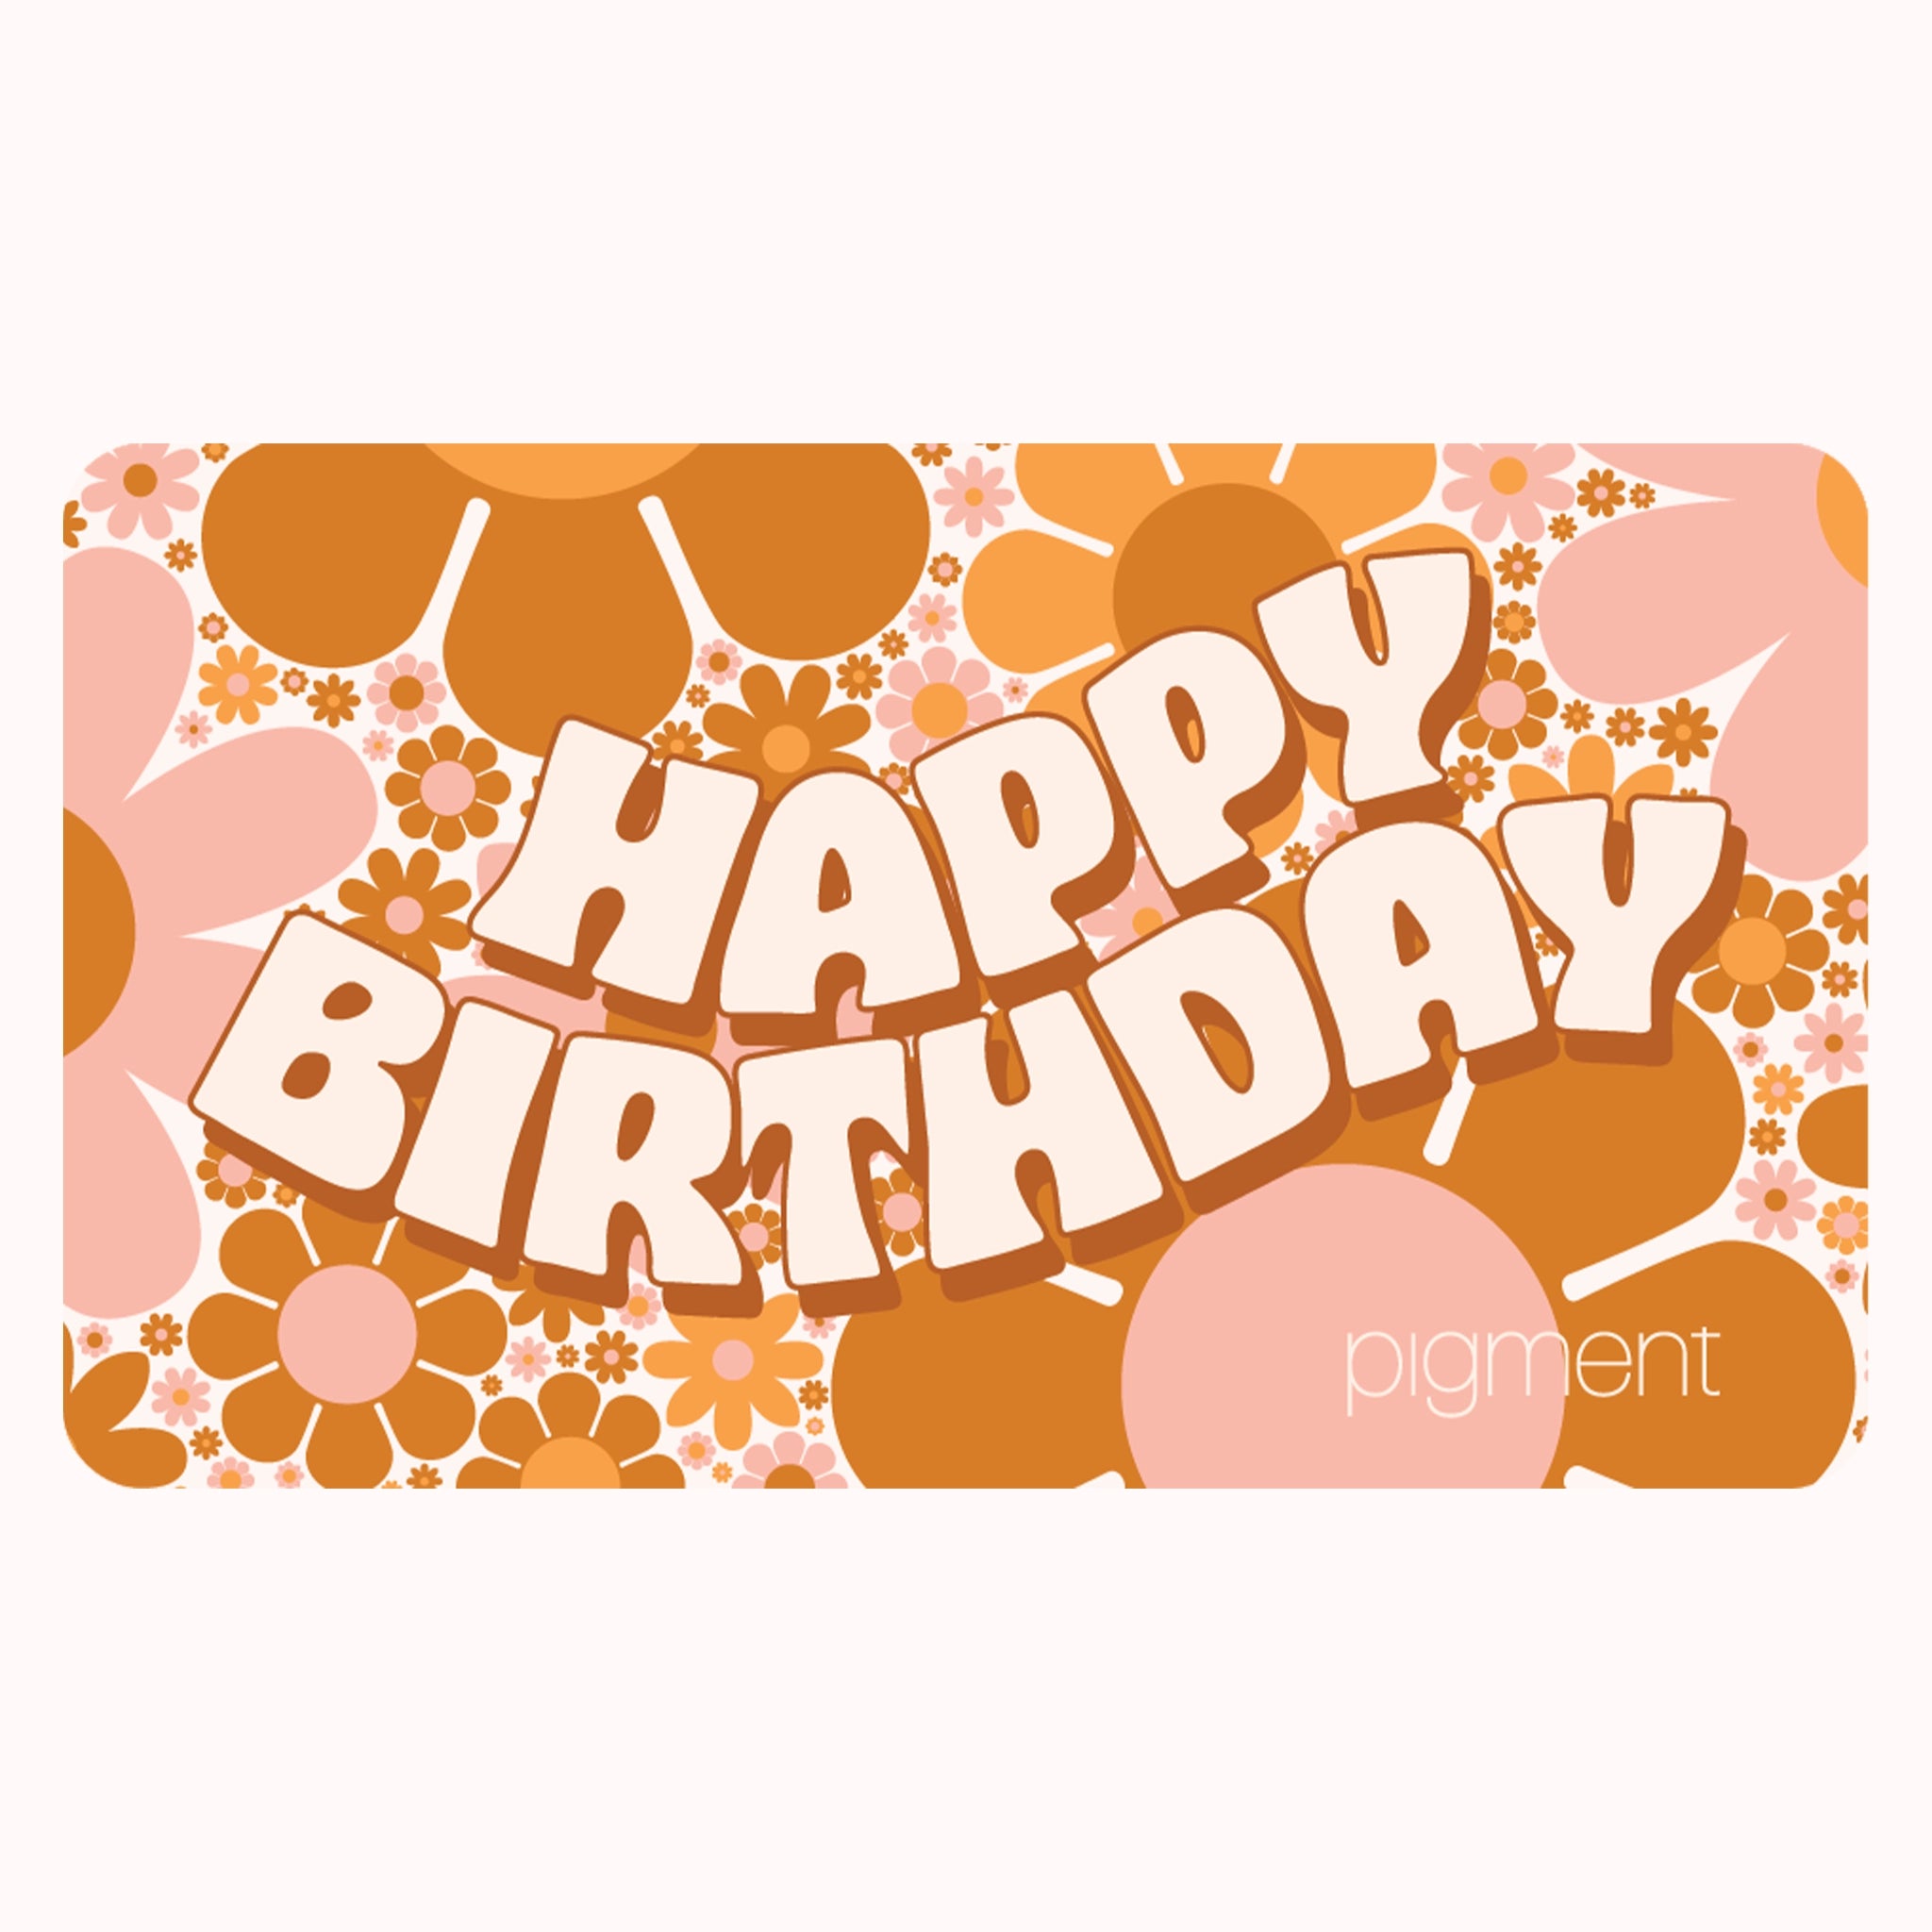 On a white background is a pink and brown daisy print gift card with ivory letters across the front that reads, "Happy Birthday".